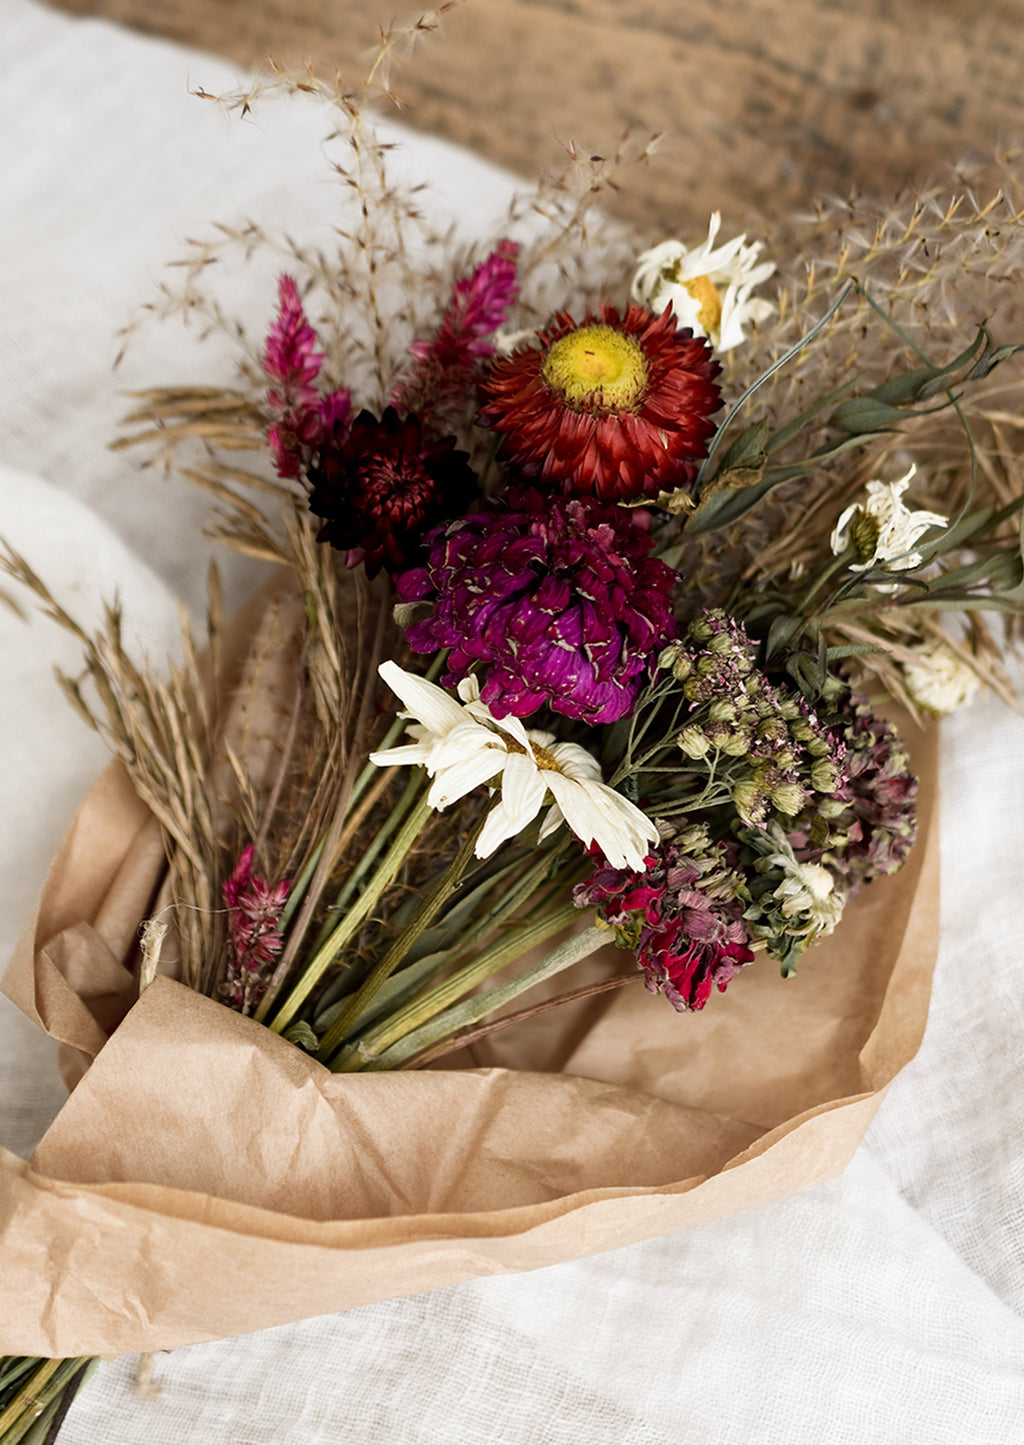 1: A dried flower bouquet in dark red and pink tones.